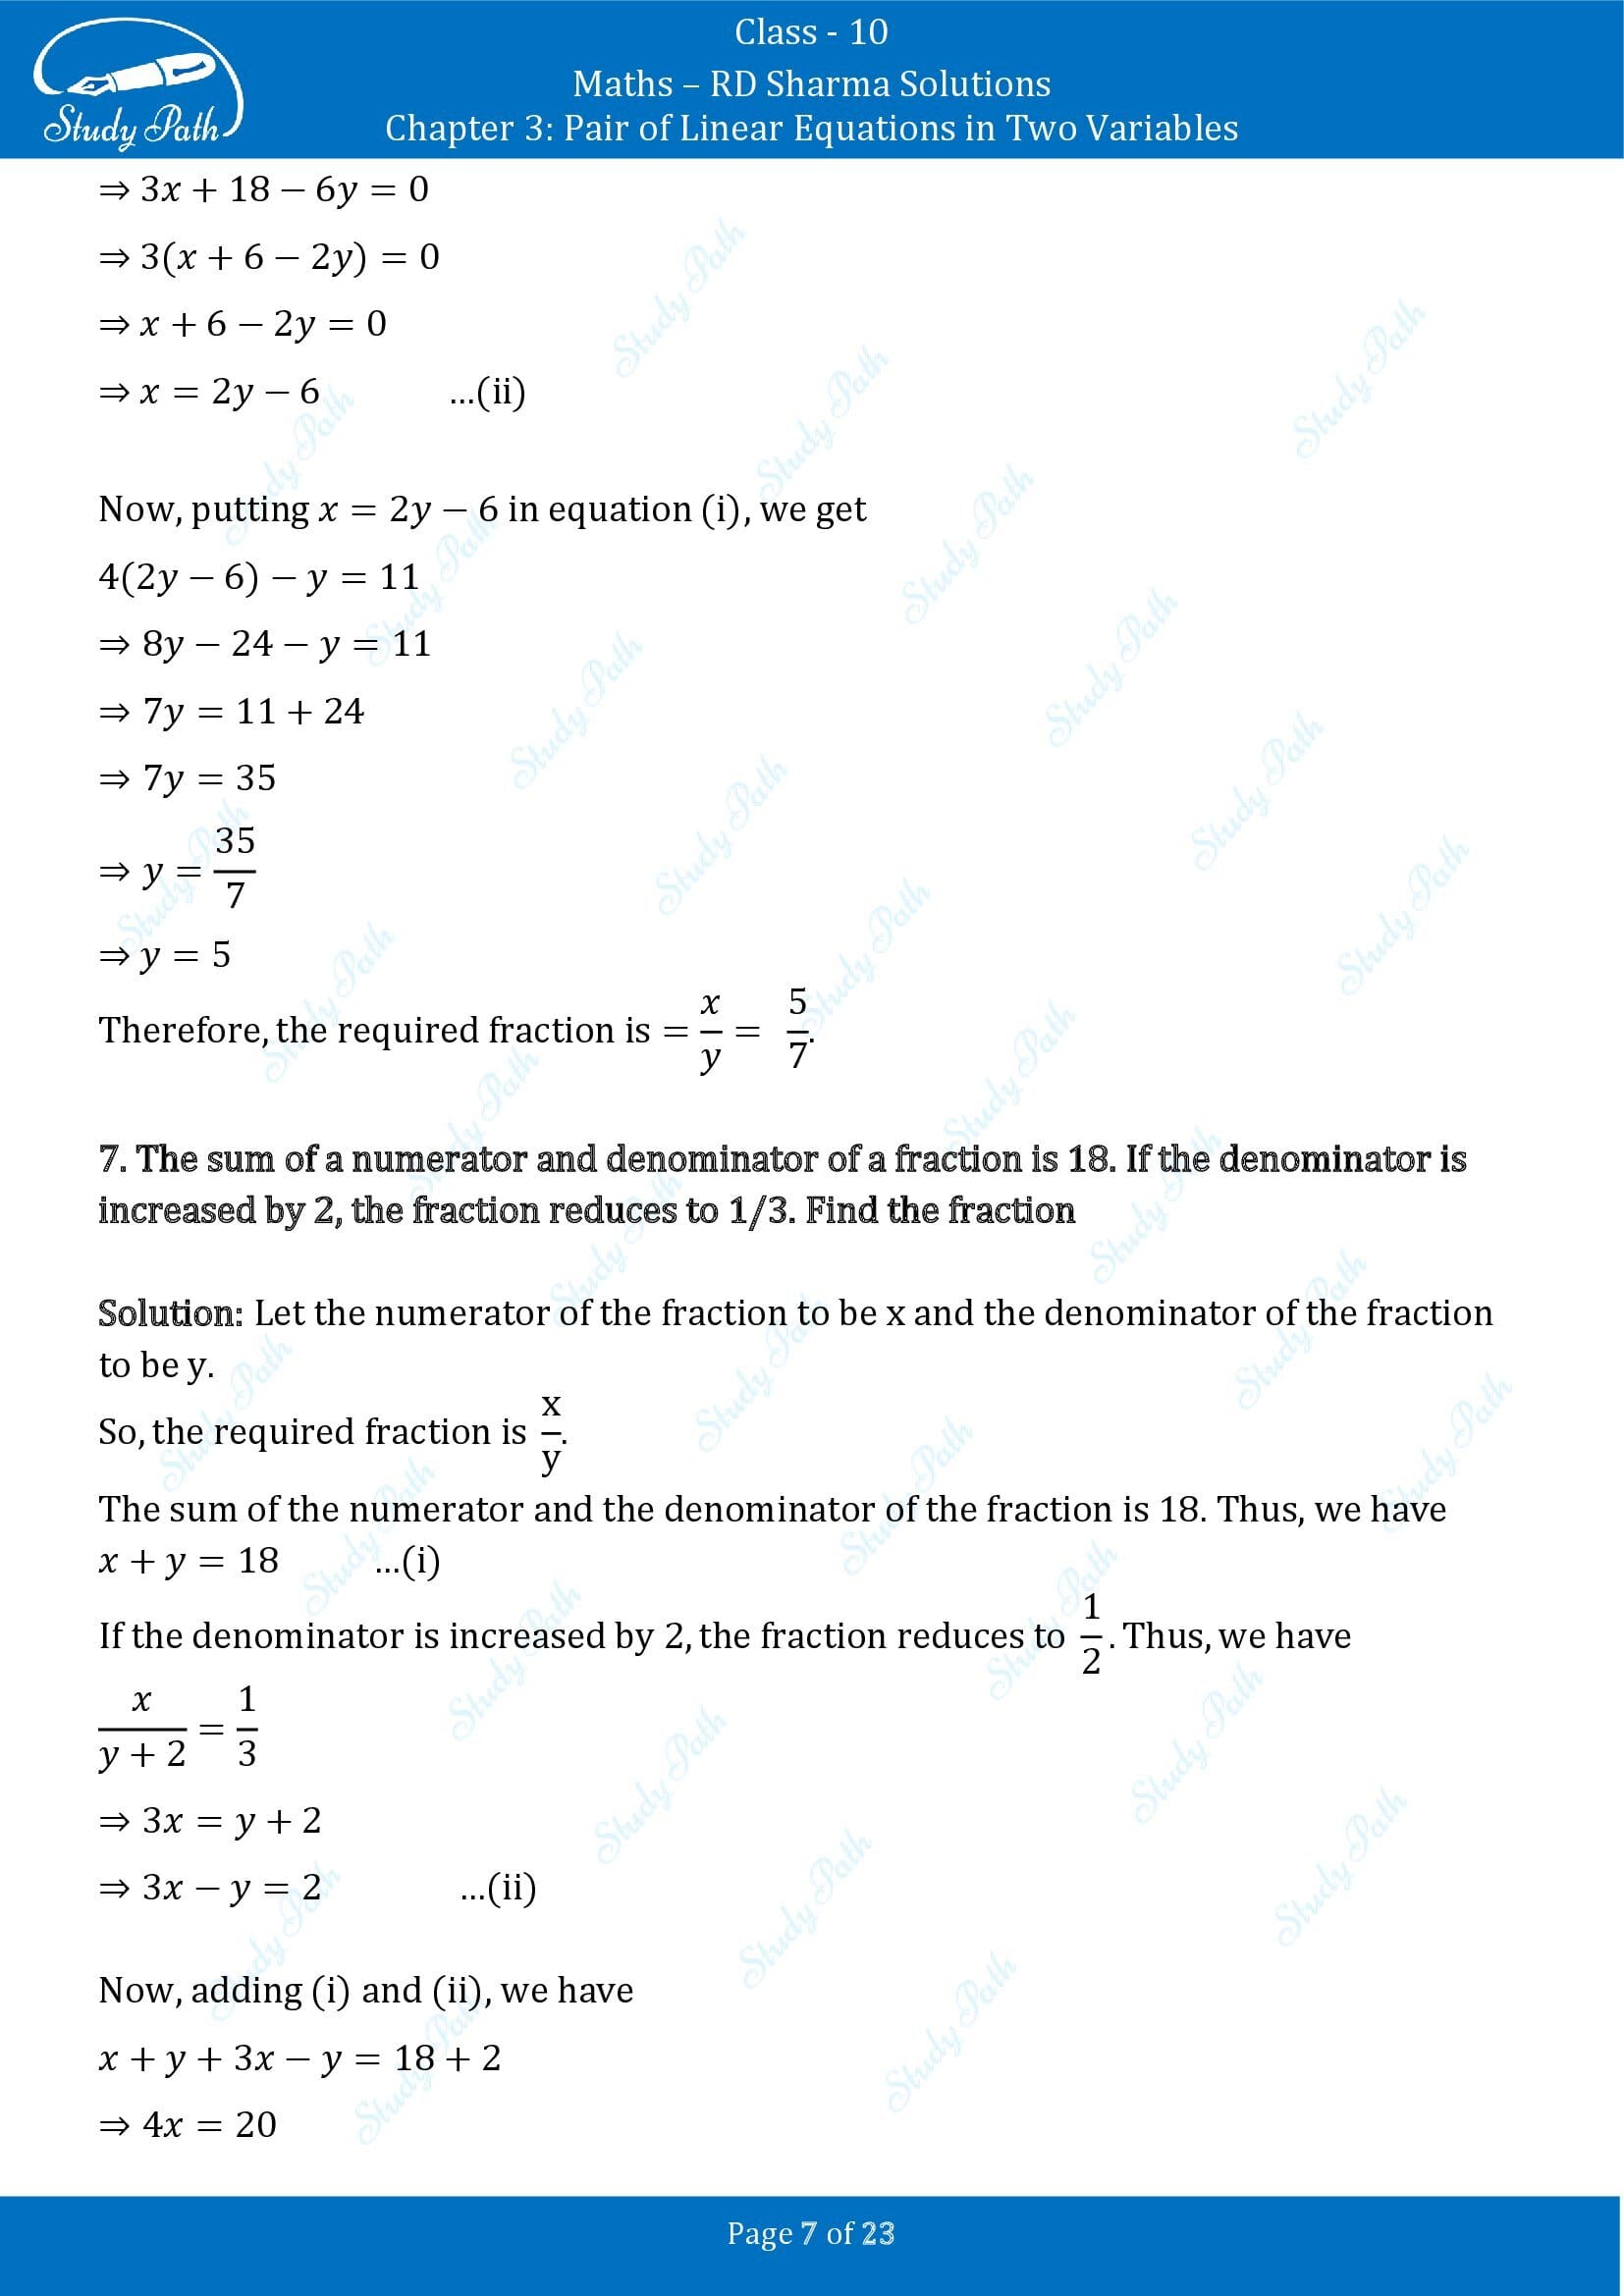 RD Sharma Solutions Class 10 Chapter 3 Pair of Linear Equations in Two Variables Exercise 3.8 00007